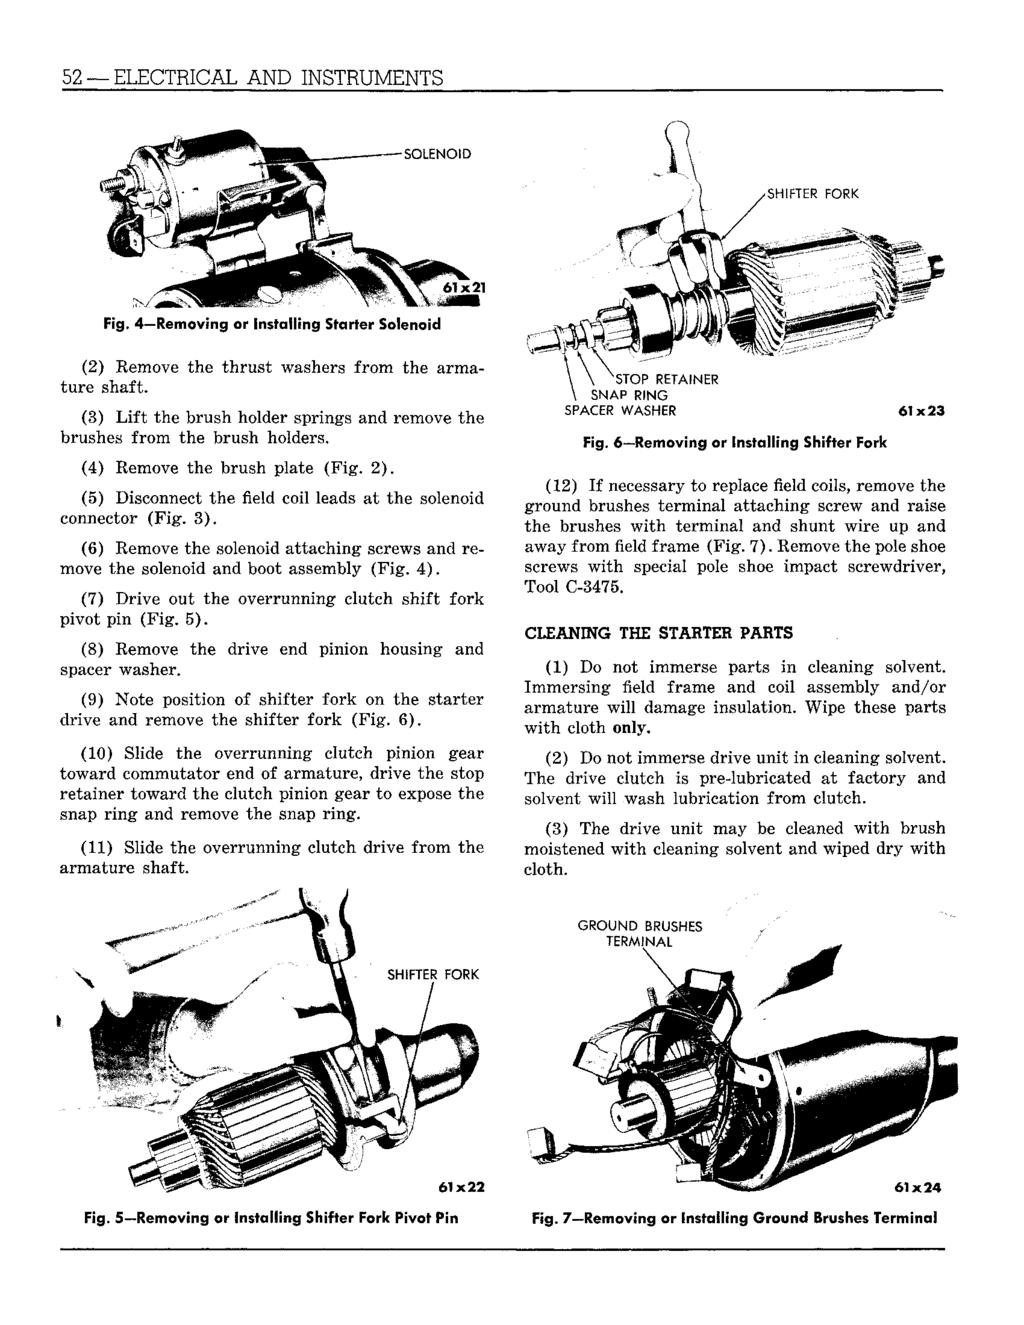 52 ELECTRICAL AND INSTRUMENTS ' " J"" v... SOLENOID Fig. 4 Removing or Installing Starter Solenoid (2) Remove the thrust washers from the armature shaft.